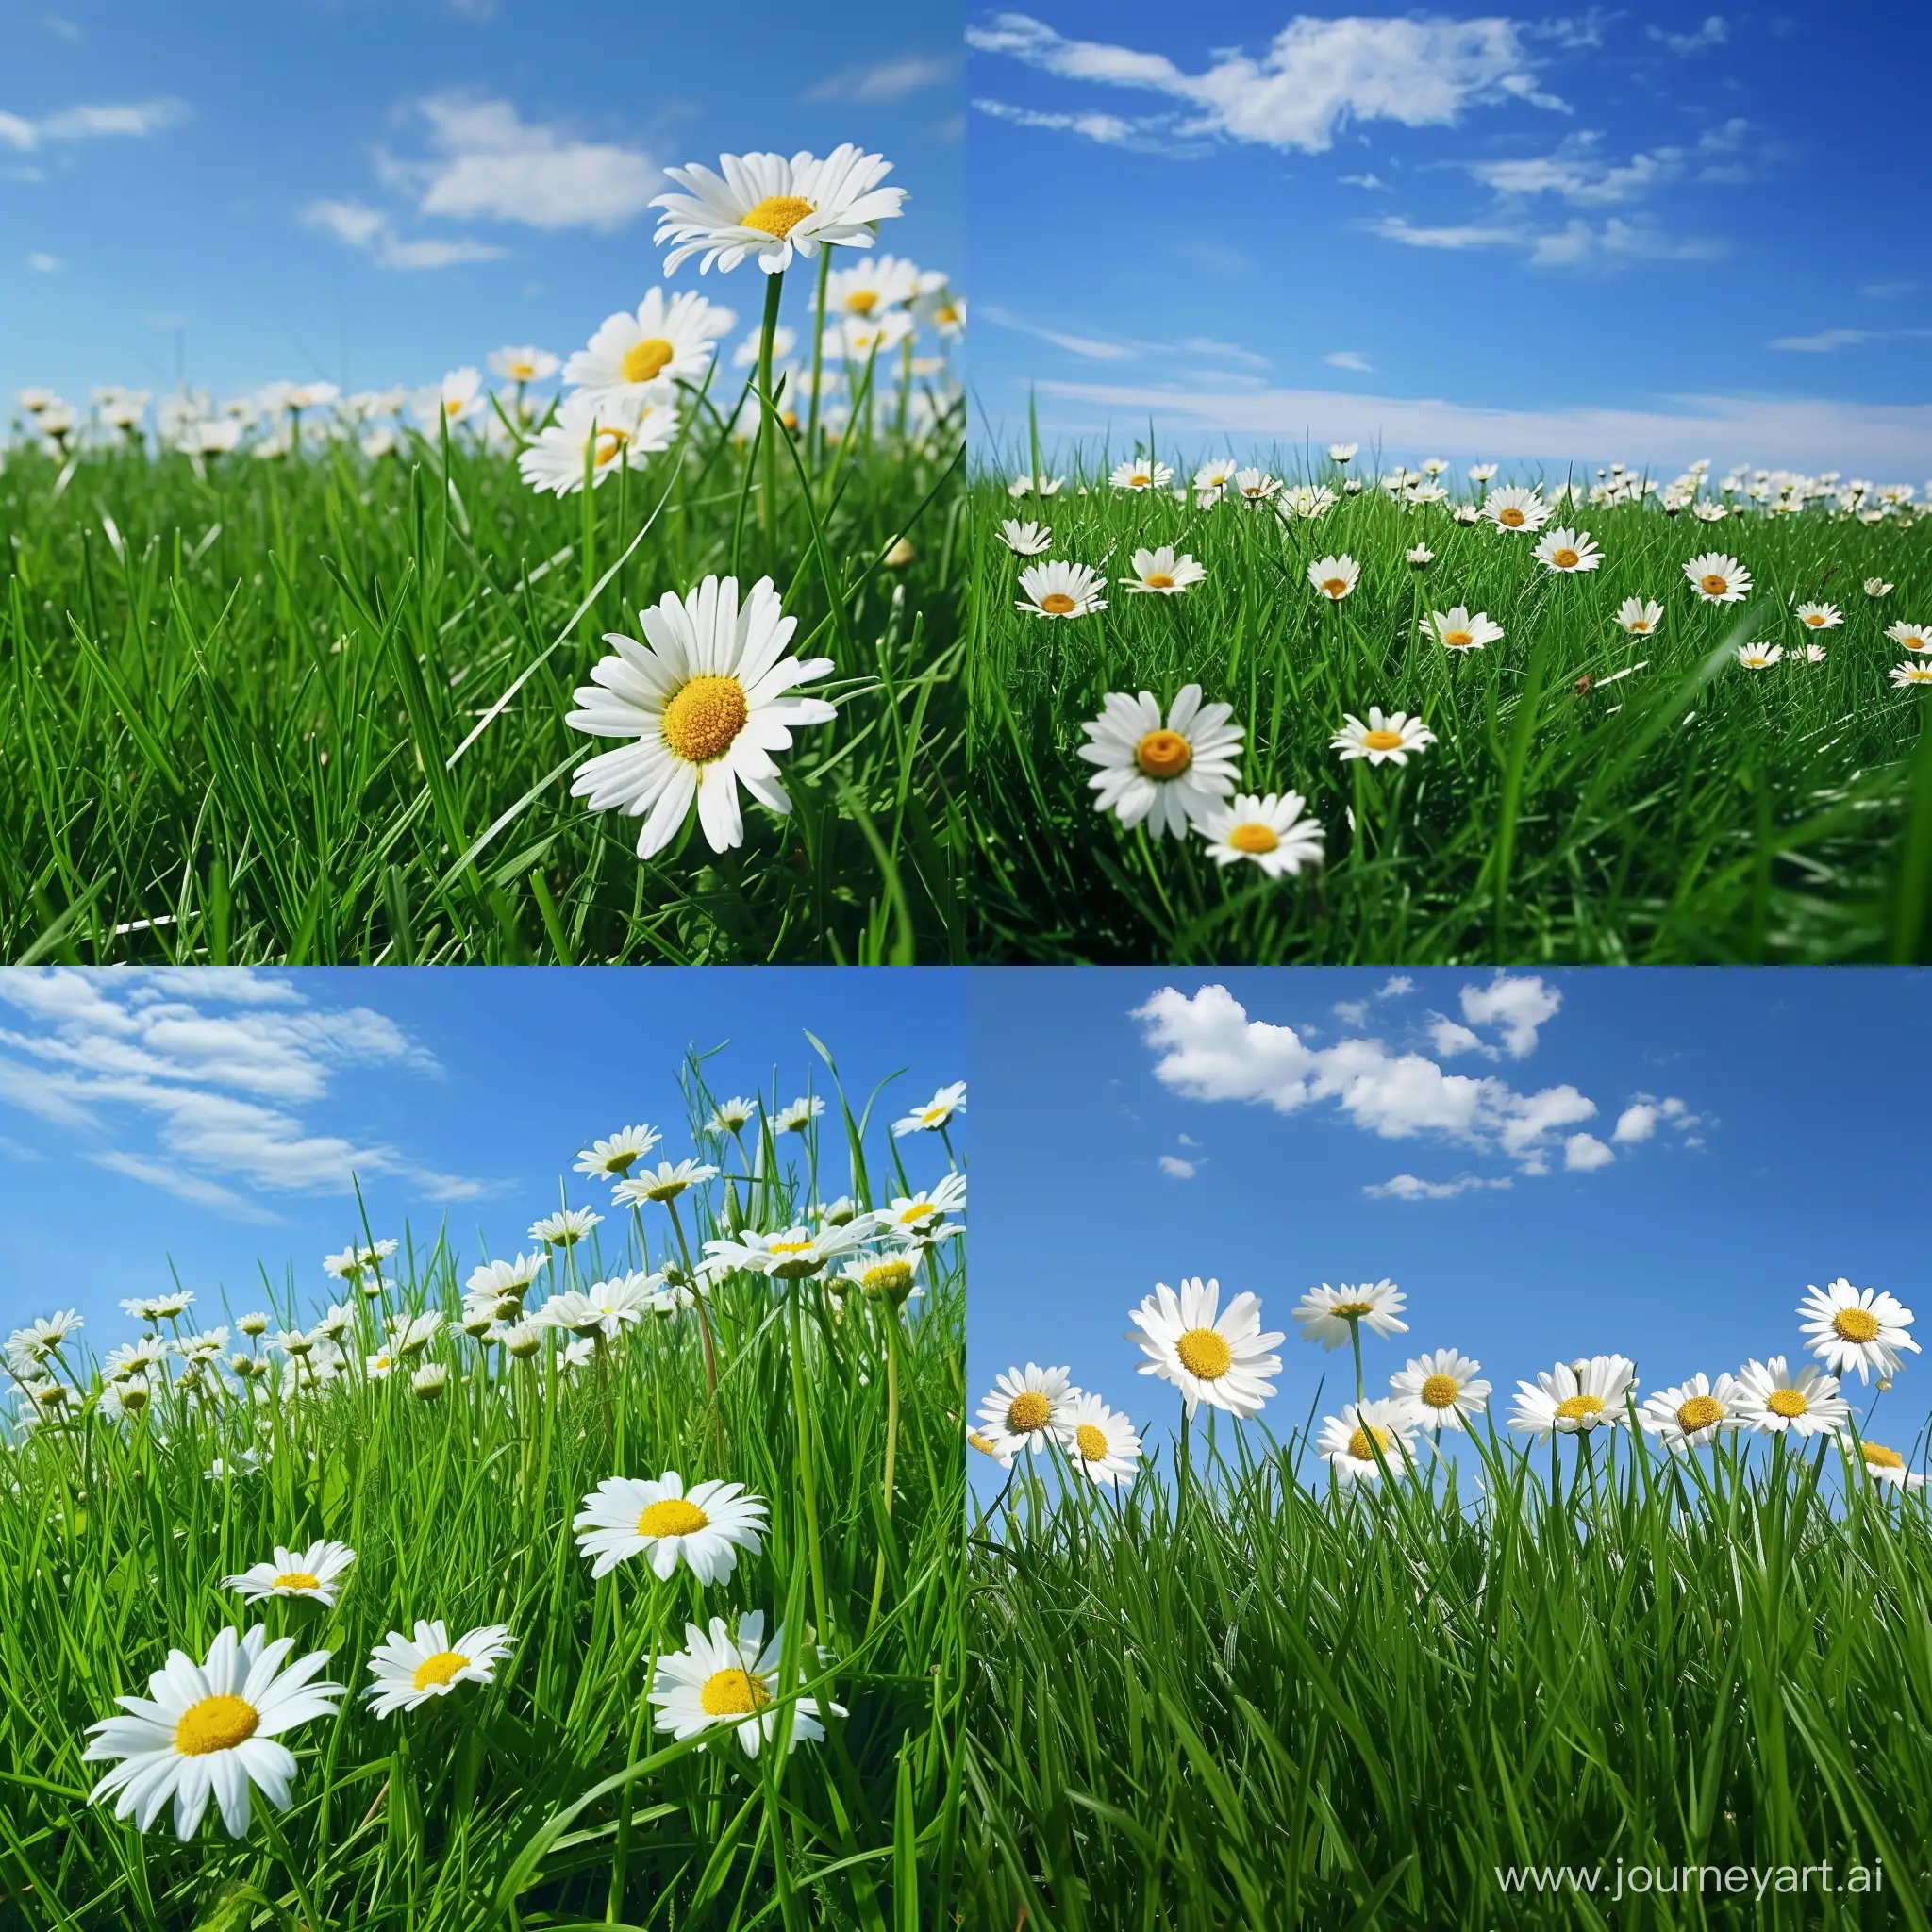 Blooming-White-Daisies-in-Lush-Green-Field-under-a-Clear-Blue-Sky